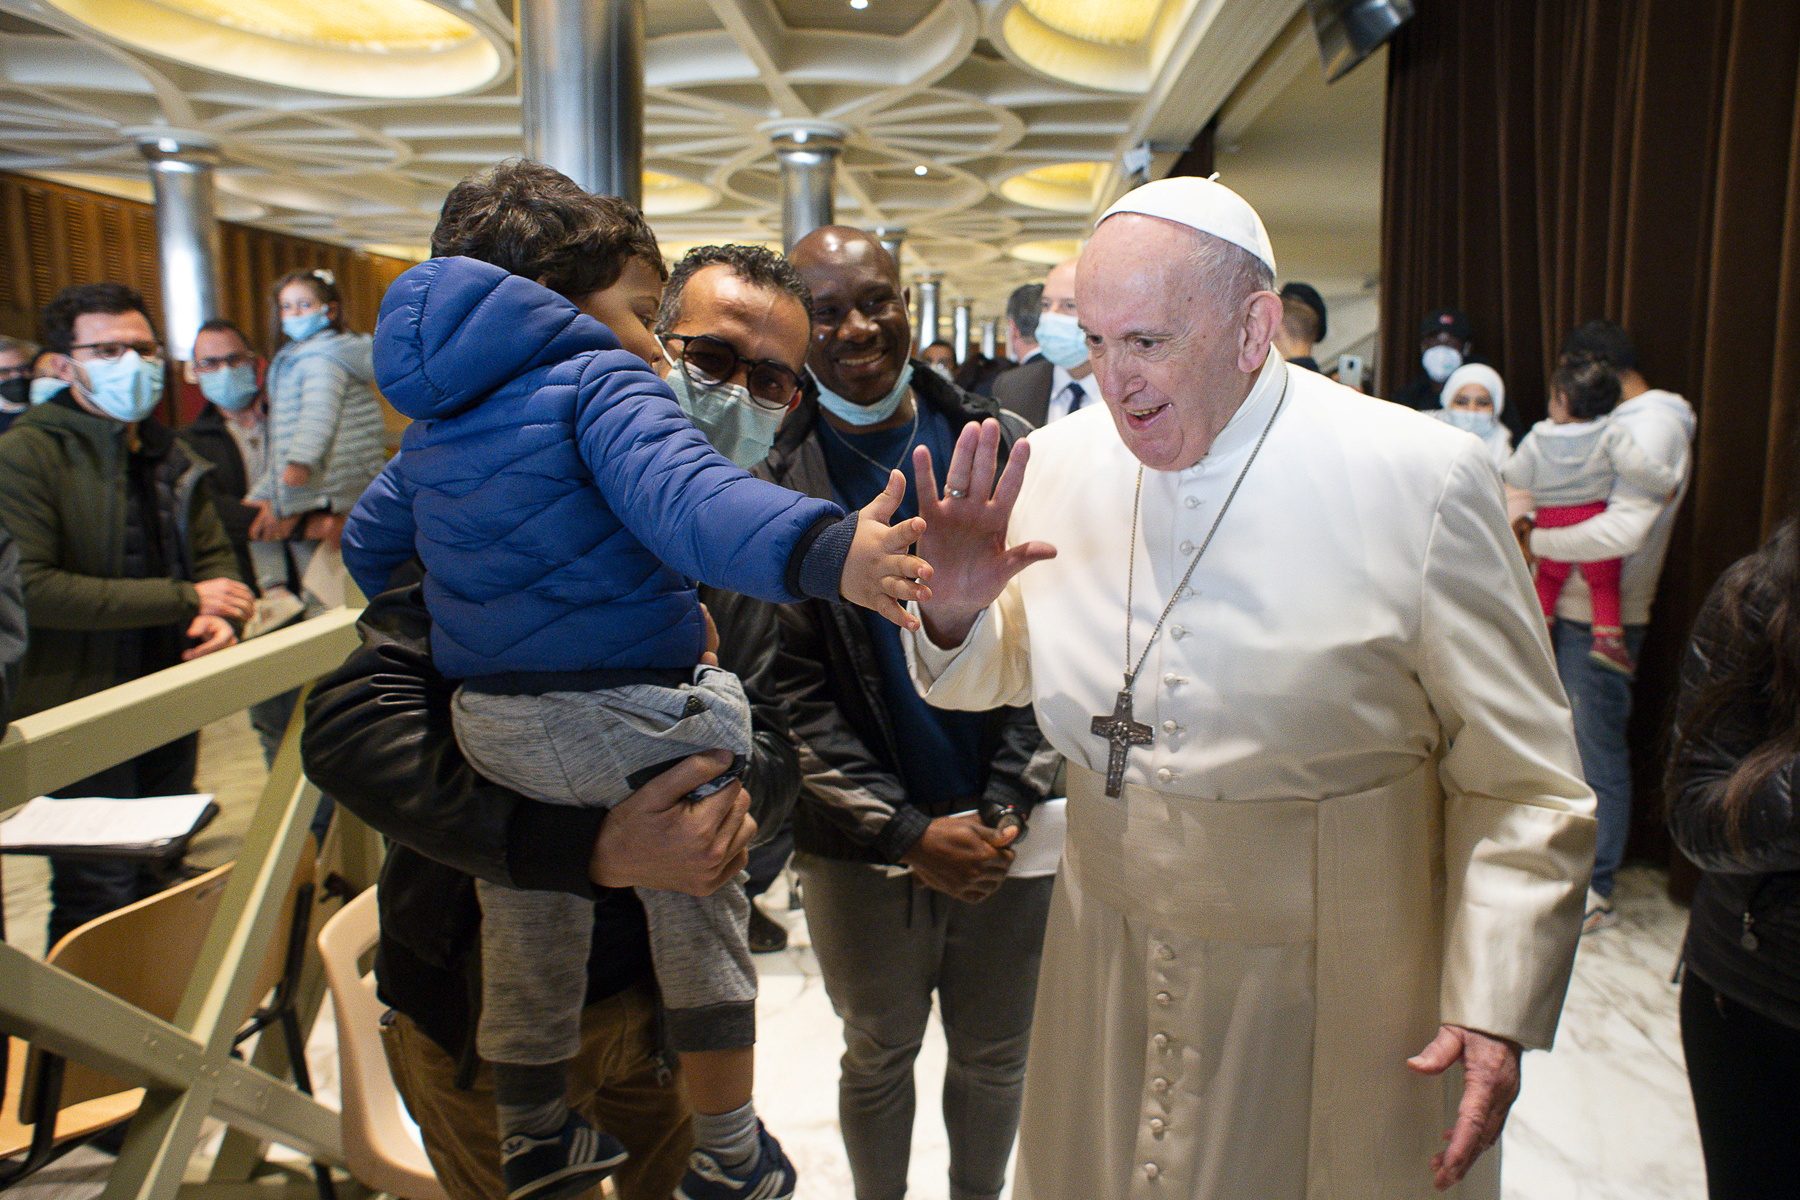 Rome homeless get free COVID-19 shots – and a visit from the Pope